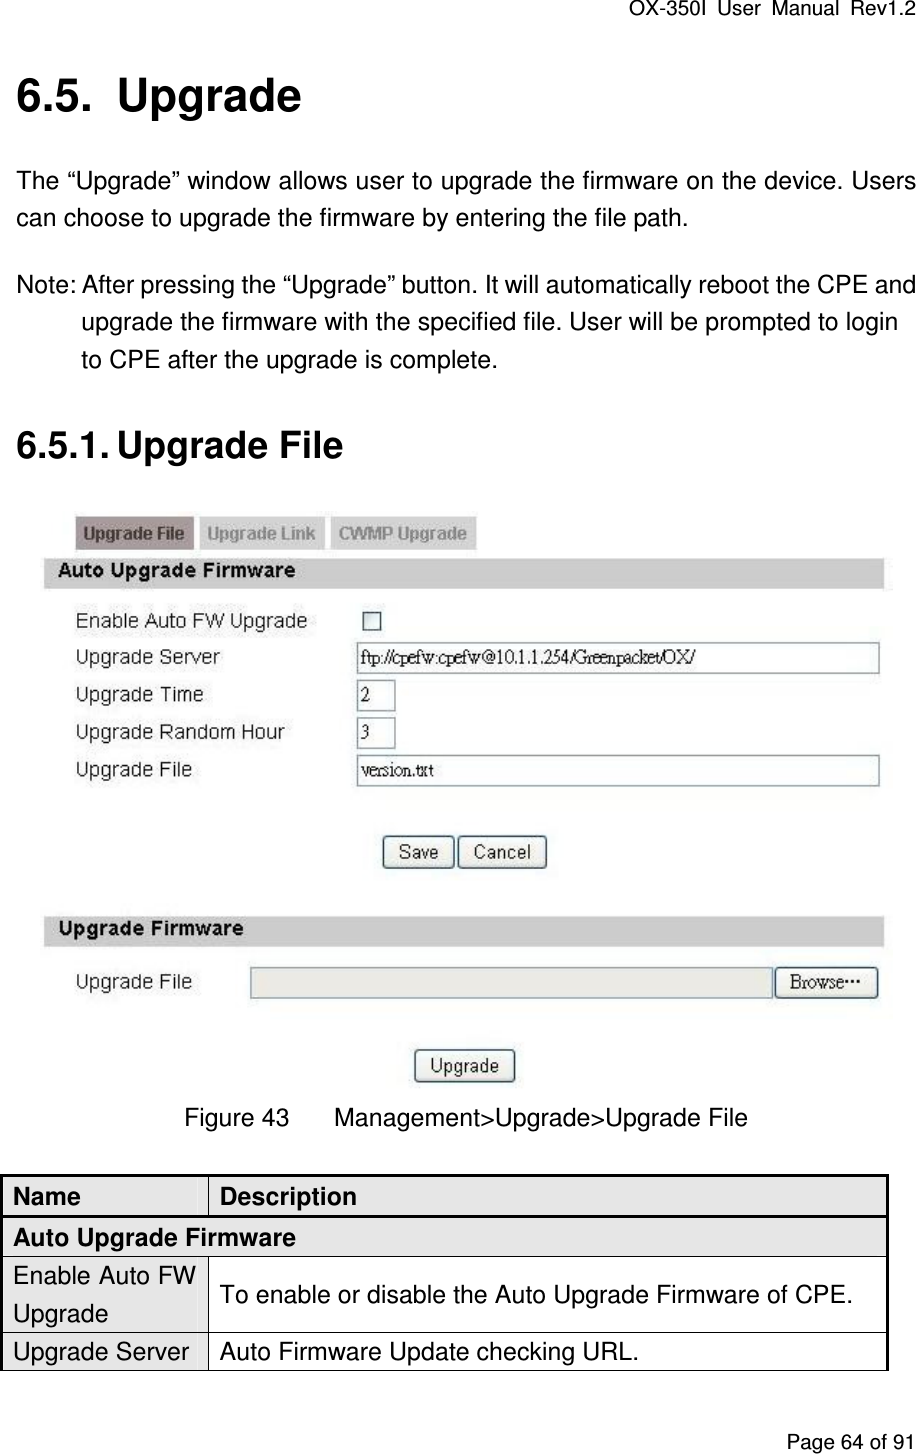 OX-350I  User  Manual  Rev1.2 Page 64 of 91 6.5.  Upgrade The “Upgrade” window allows user to upgrade the firmware on the device. Users can choose to upgrade the firmware by entering the file path. Note: After pressing the “Upgrade” button. It will automatically reboot the CPE and upgrade the firmware with the specified file. User will be prompted to login to CPE after the upgrade is complete. 6.5.1. Upgrade File    Figure 43  Management&gt;Upgrade&gt;Upgrade File Name  Description Auto Upgrade Firmware Enable Auto FW Upgrade  To enable or disable the Auto Upgrade Firmware of CPE. Upgrade Server Auto Firmware Update checking URL. 